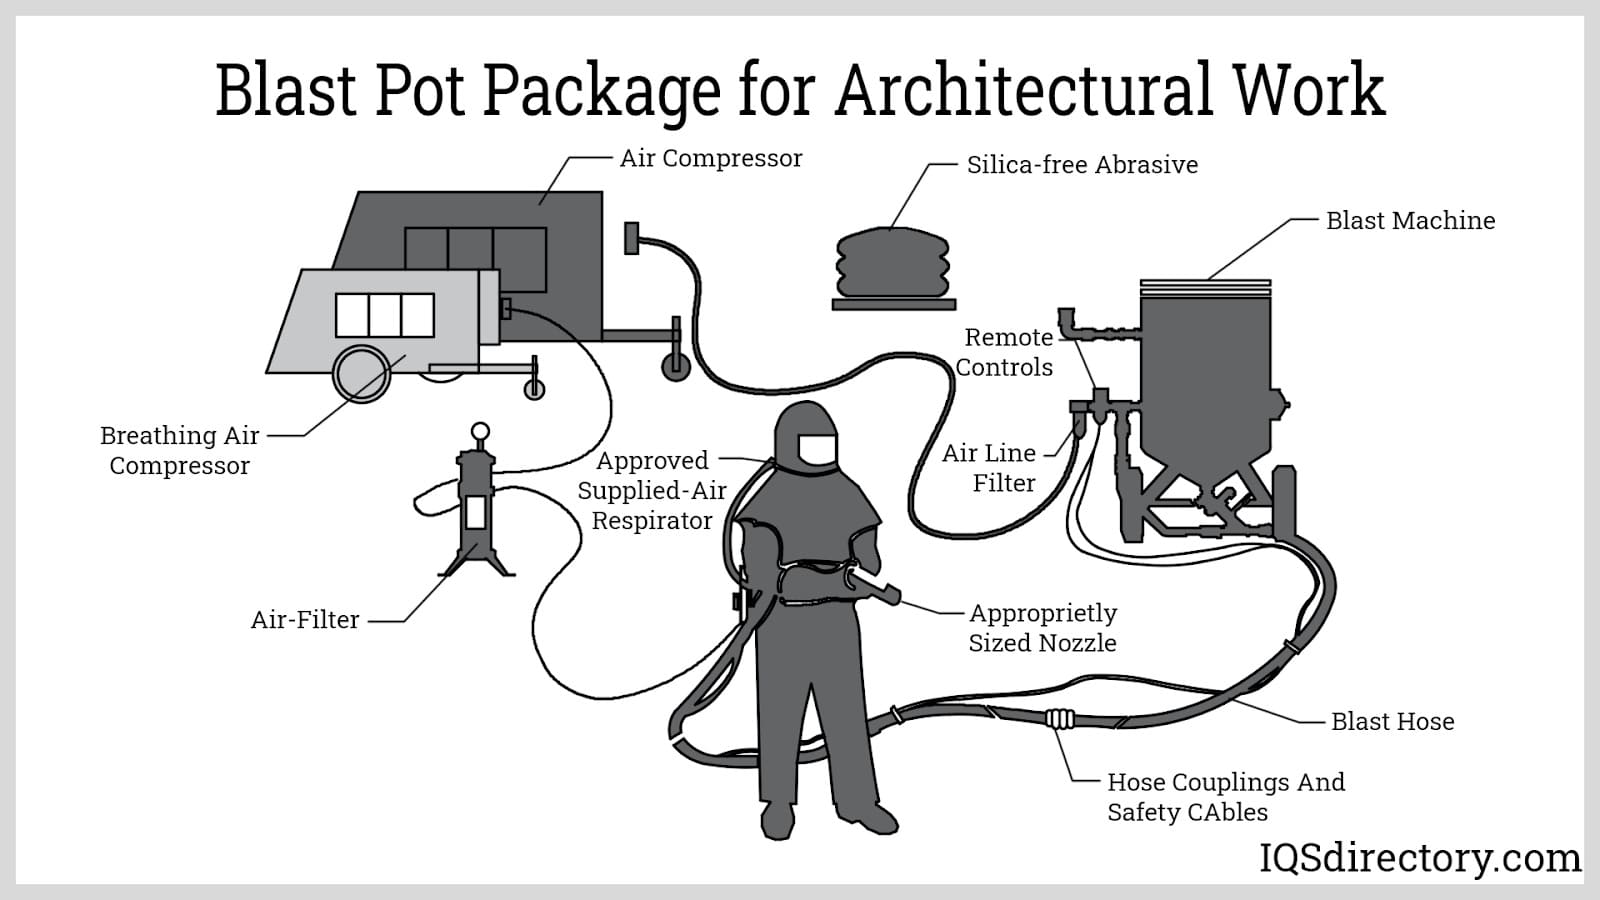 Blast Pot Package for Architectural Work